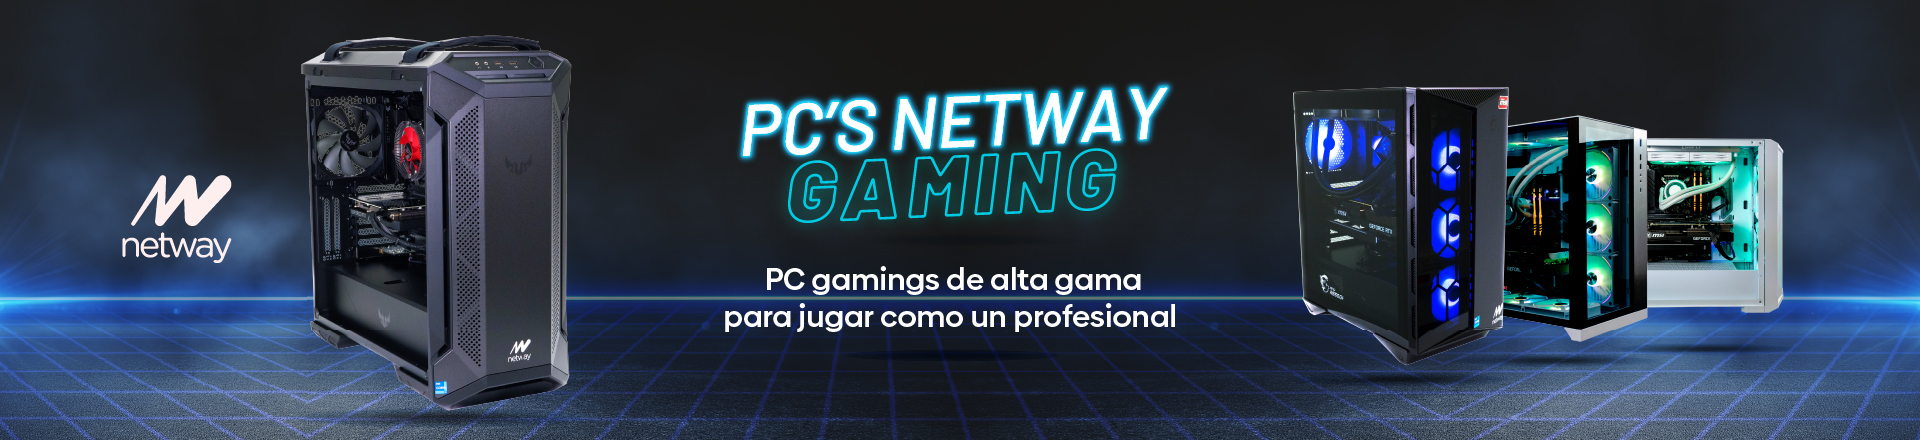 PC's Netway Gaming